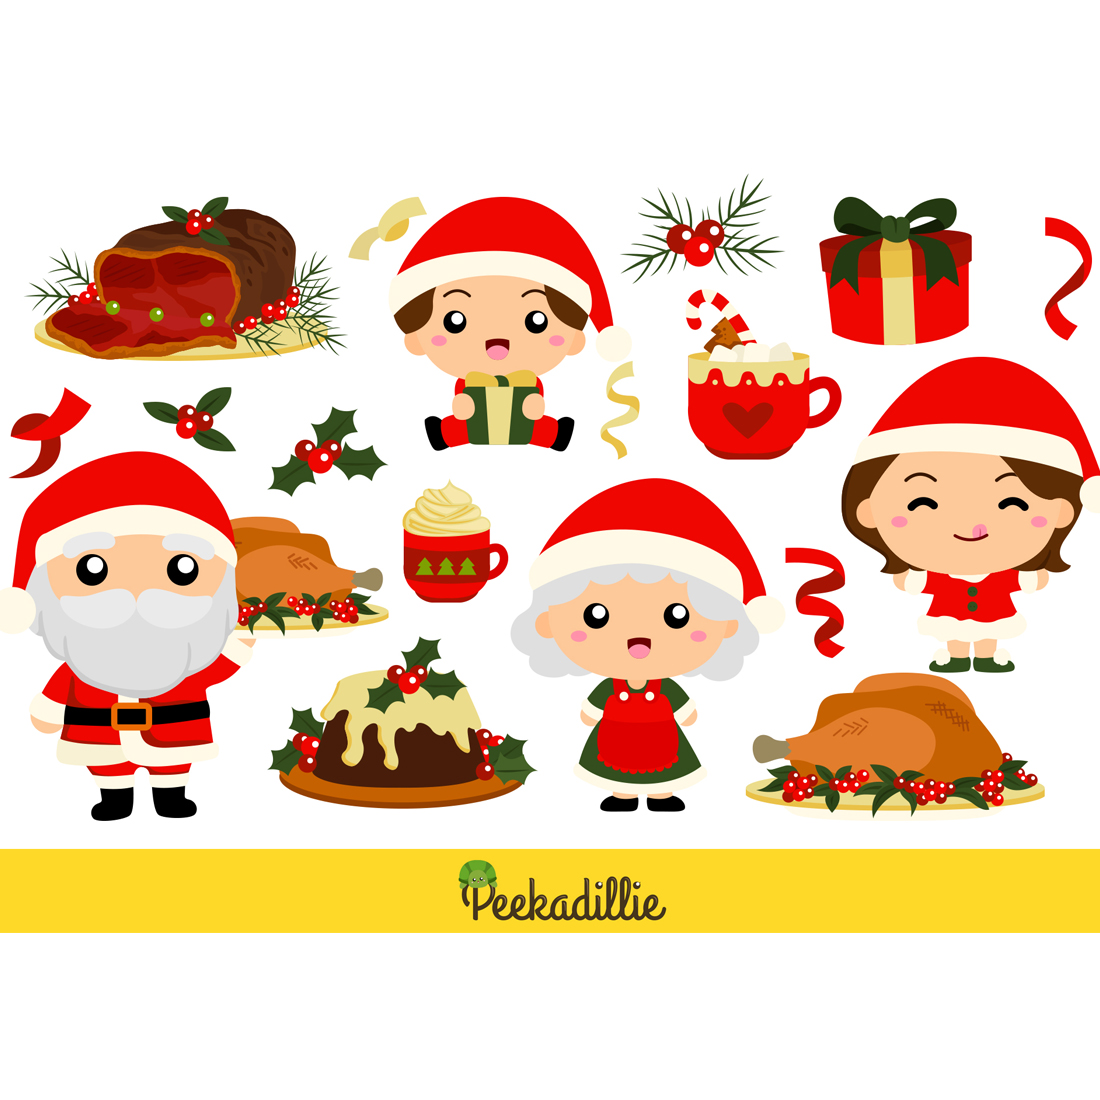 Set of cute images on Christmas theme.